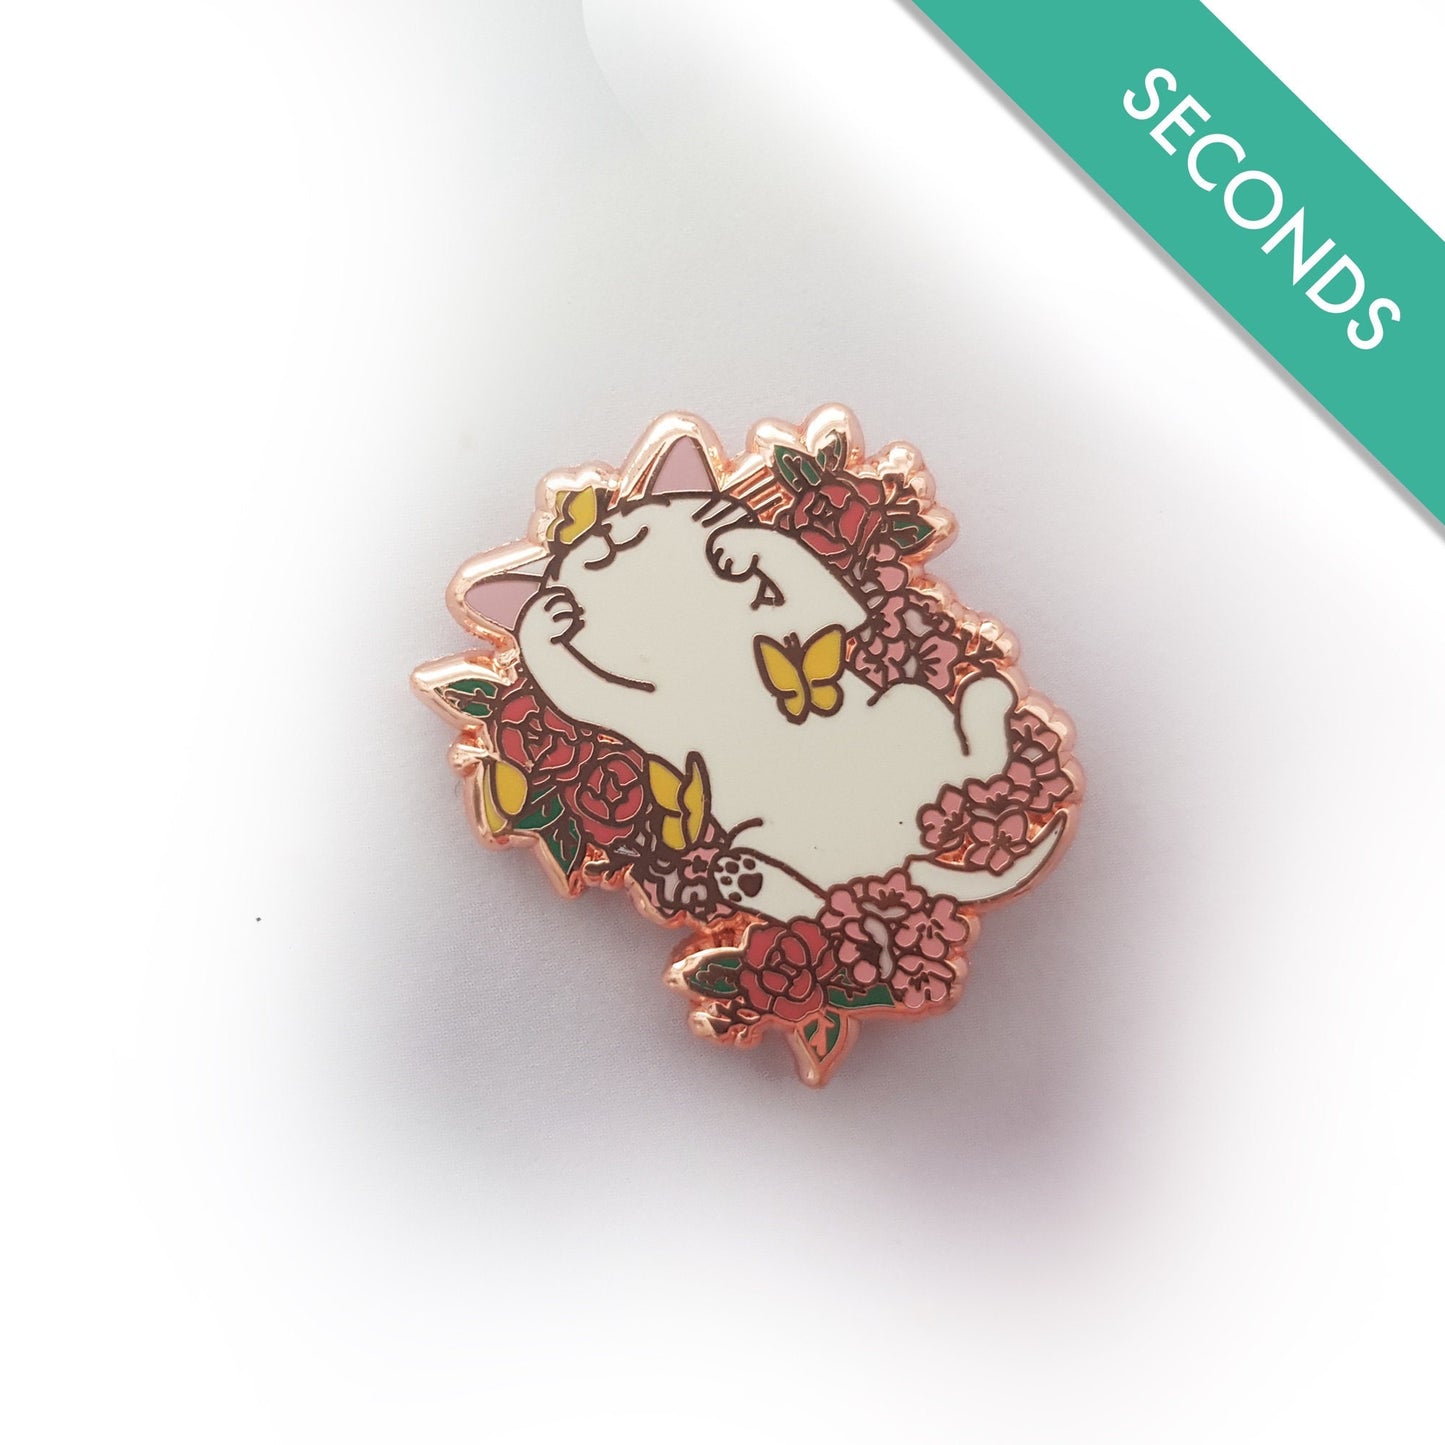 Spring Florals Kitty - Pin Seconds - Small Enamel Pin